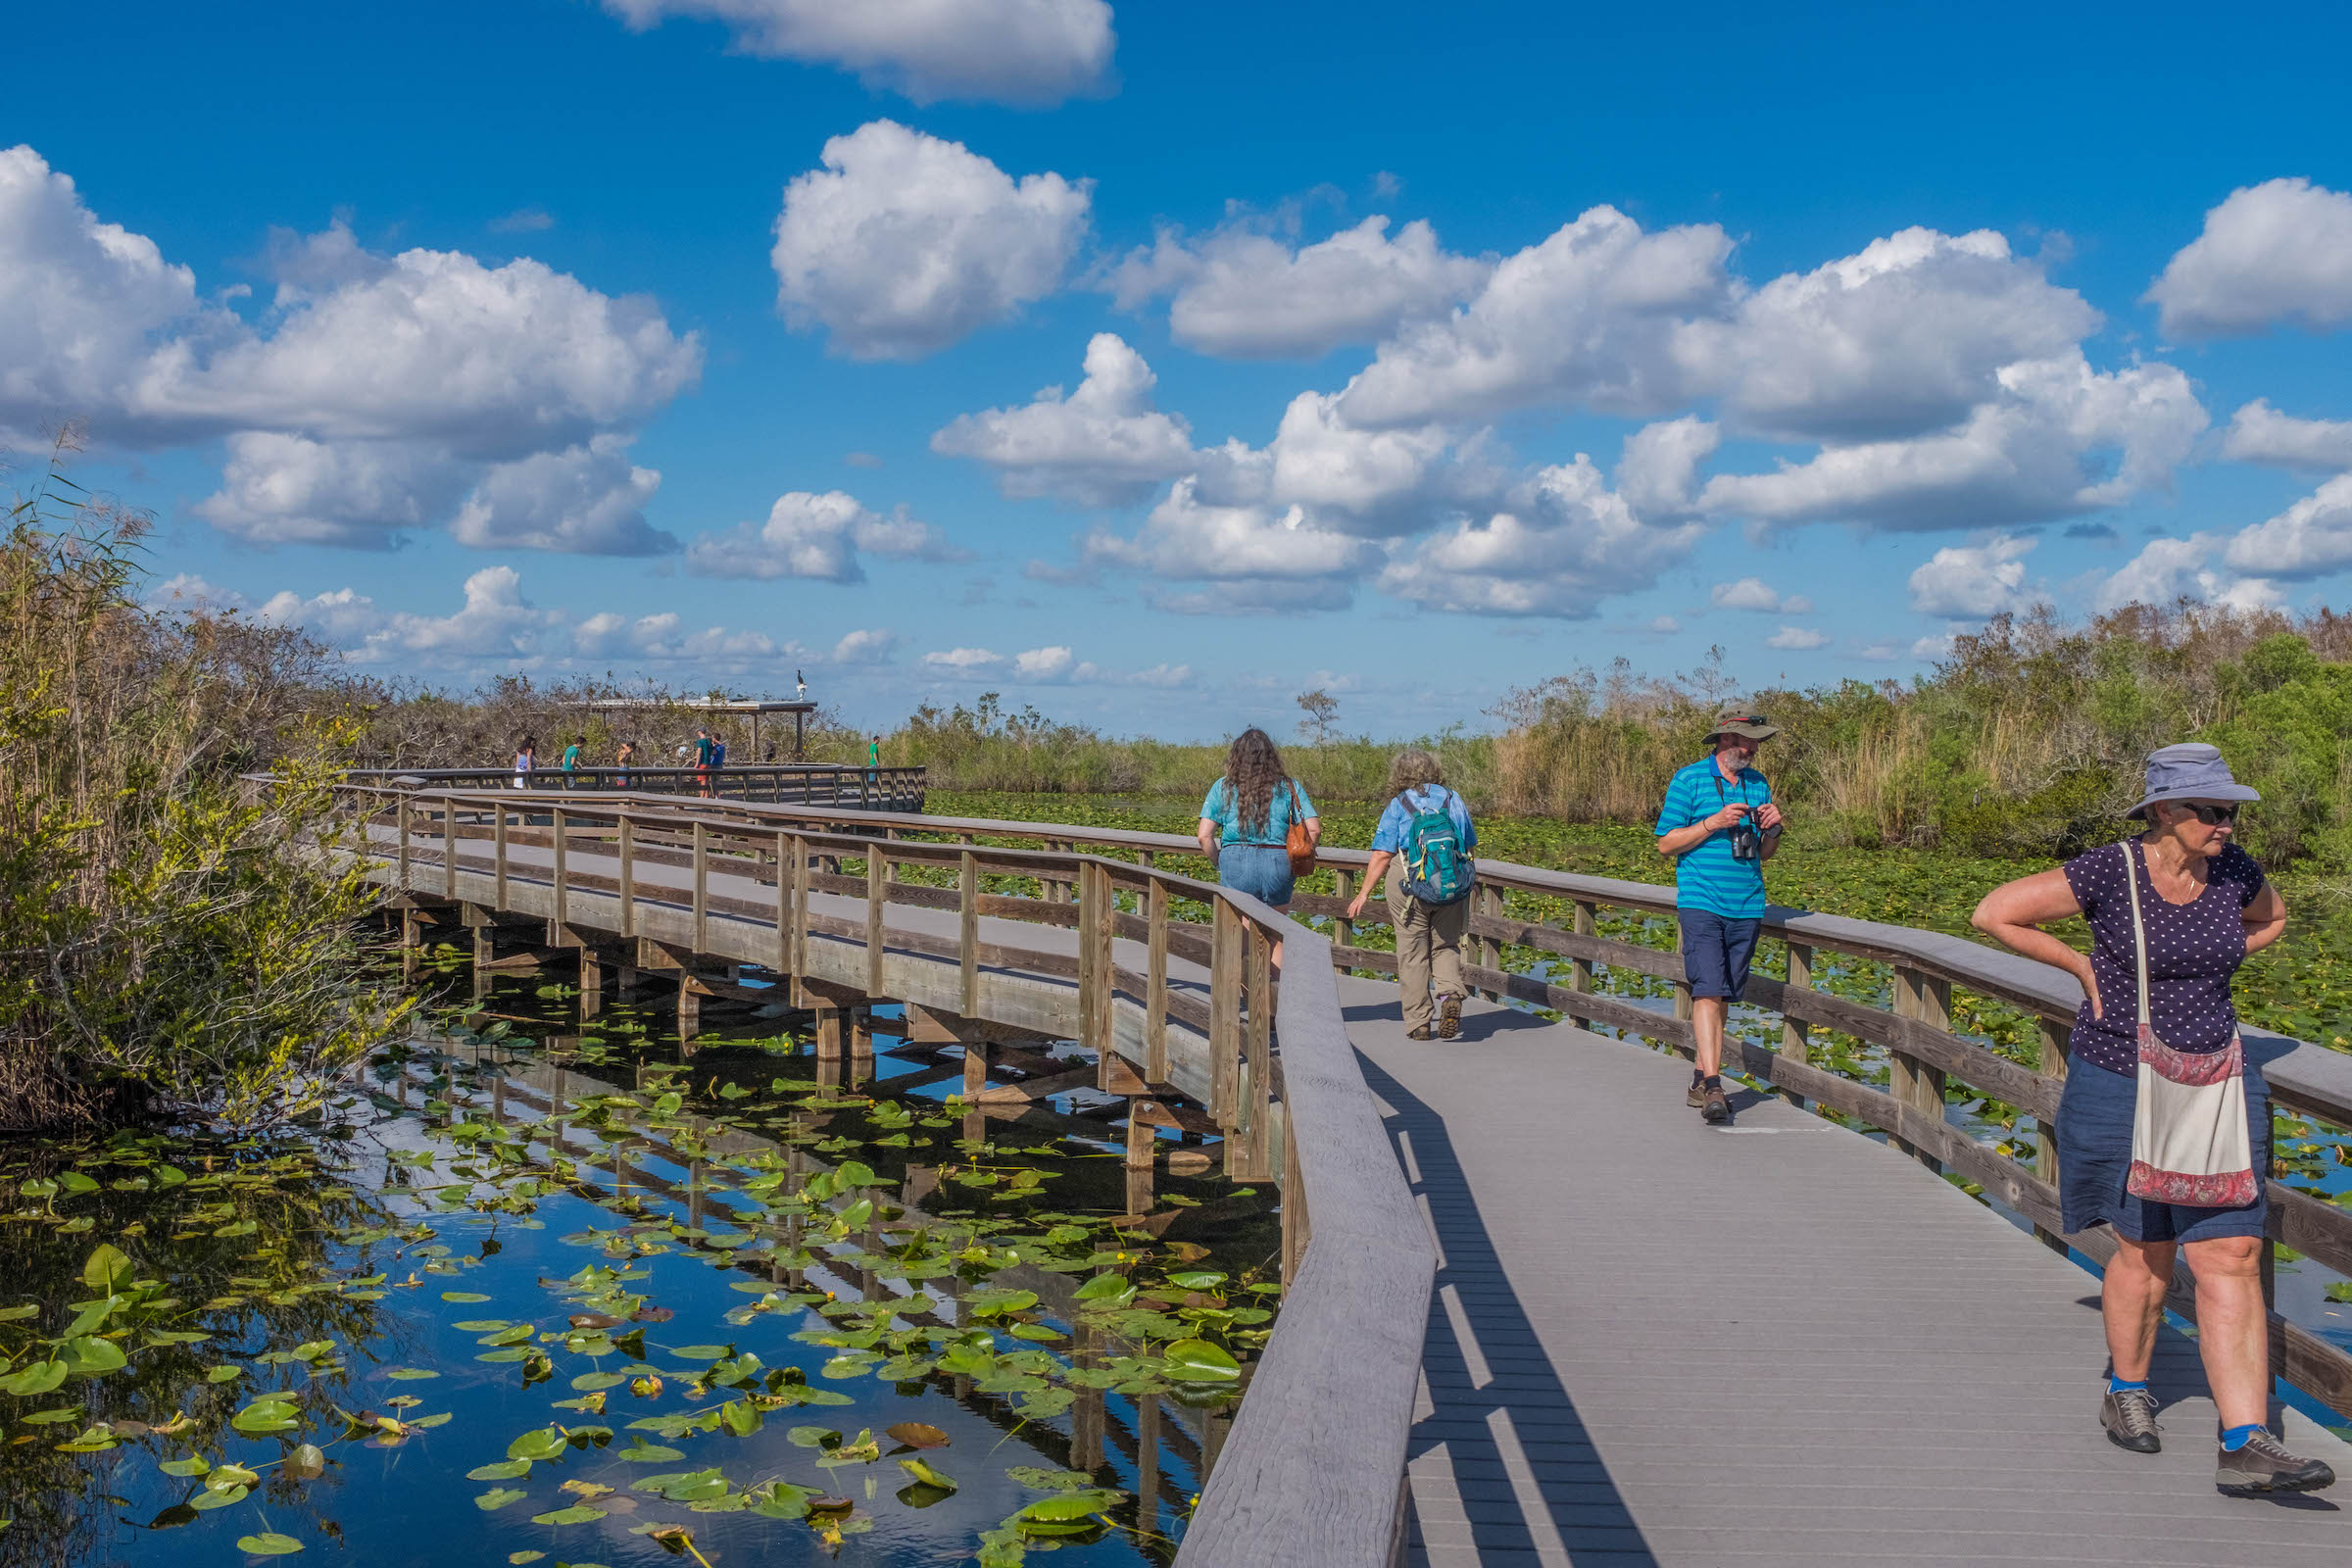 Tourists walk through the Anhinga Trail in the Everglades National Park on March 2, 2019. (Jeoffrey Guillermard—Haytham-REA/Redux)